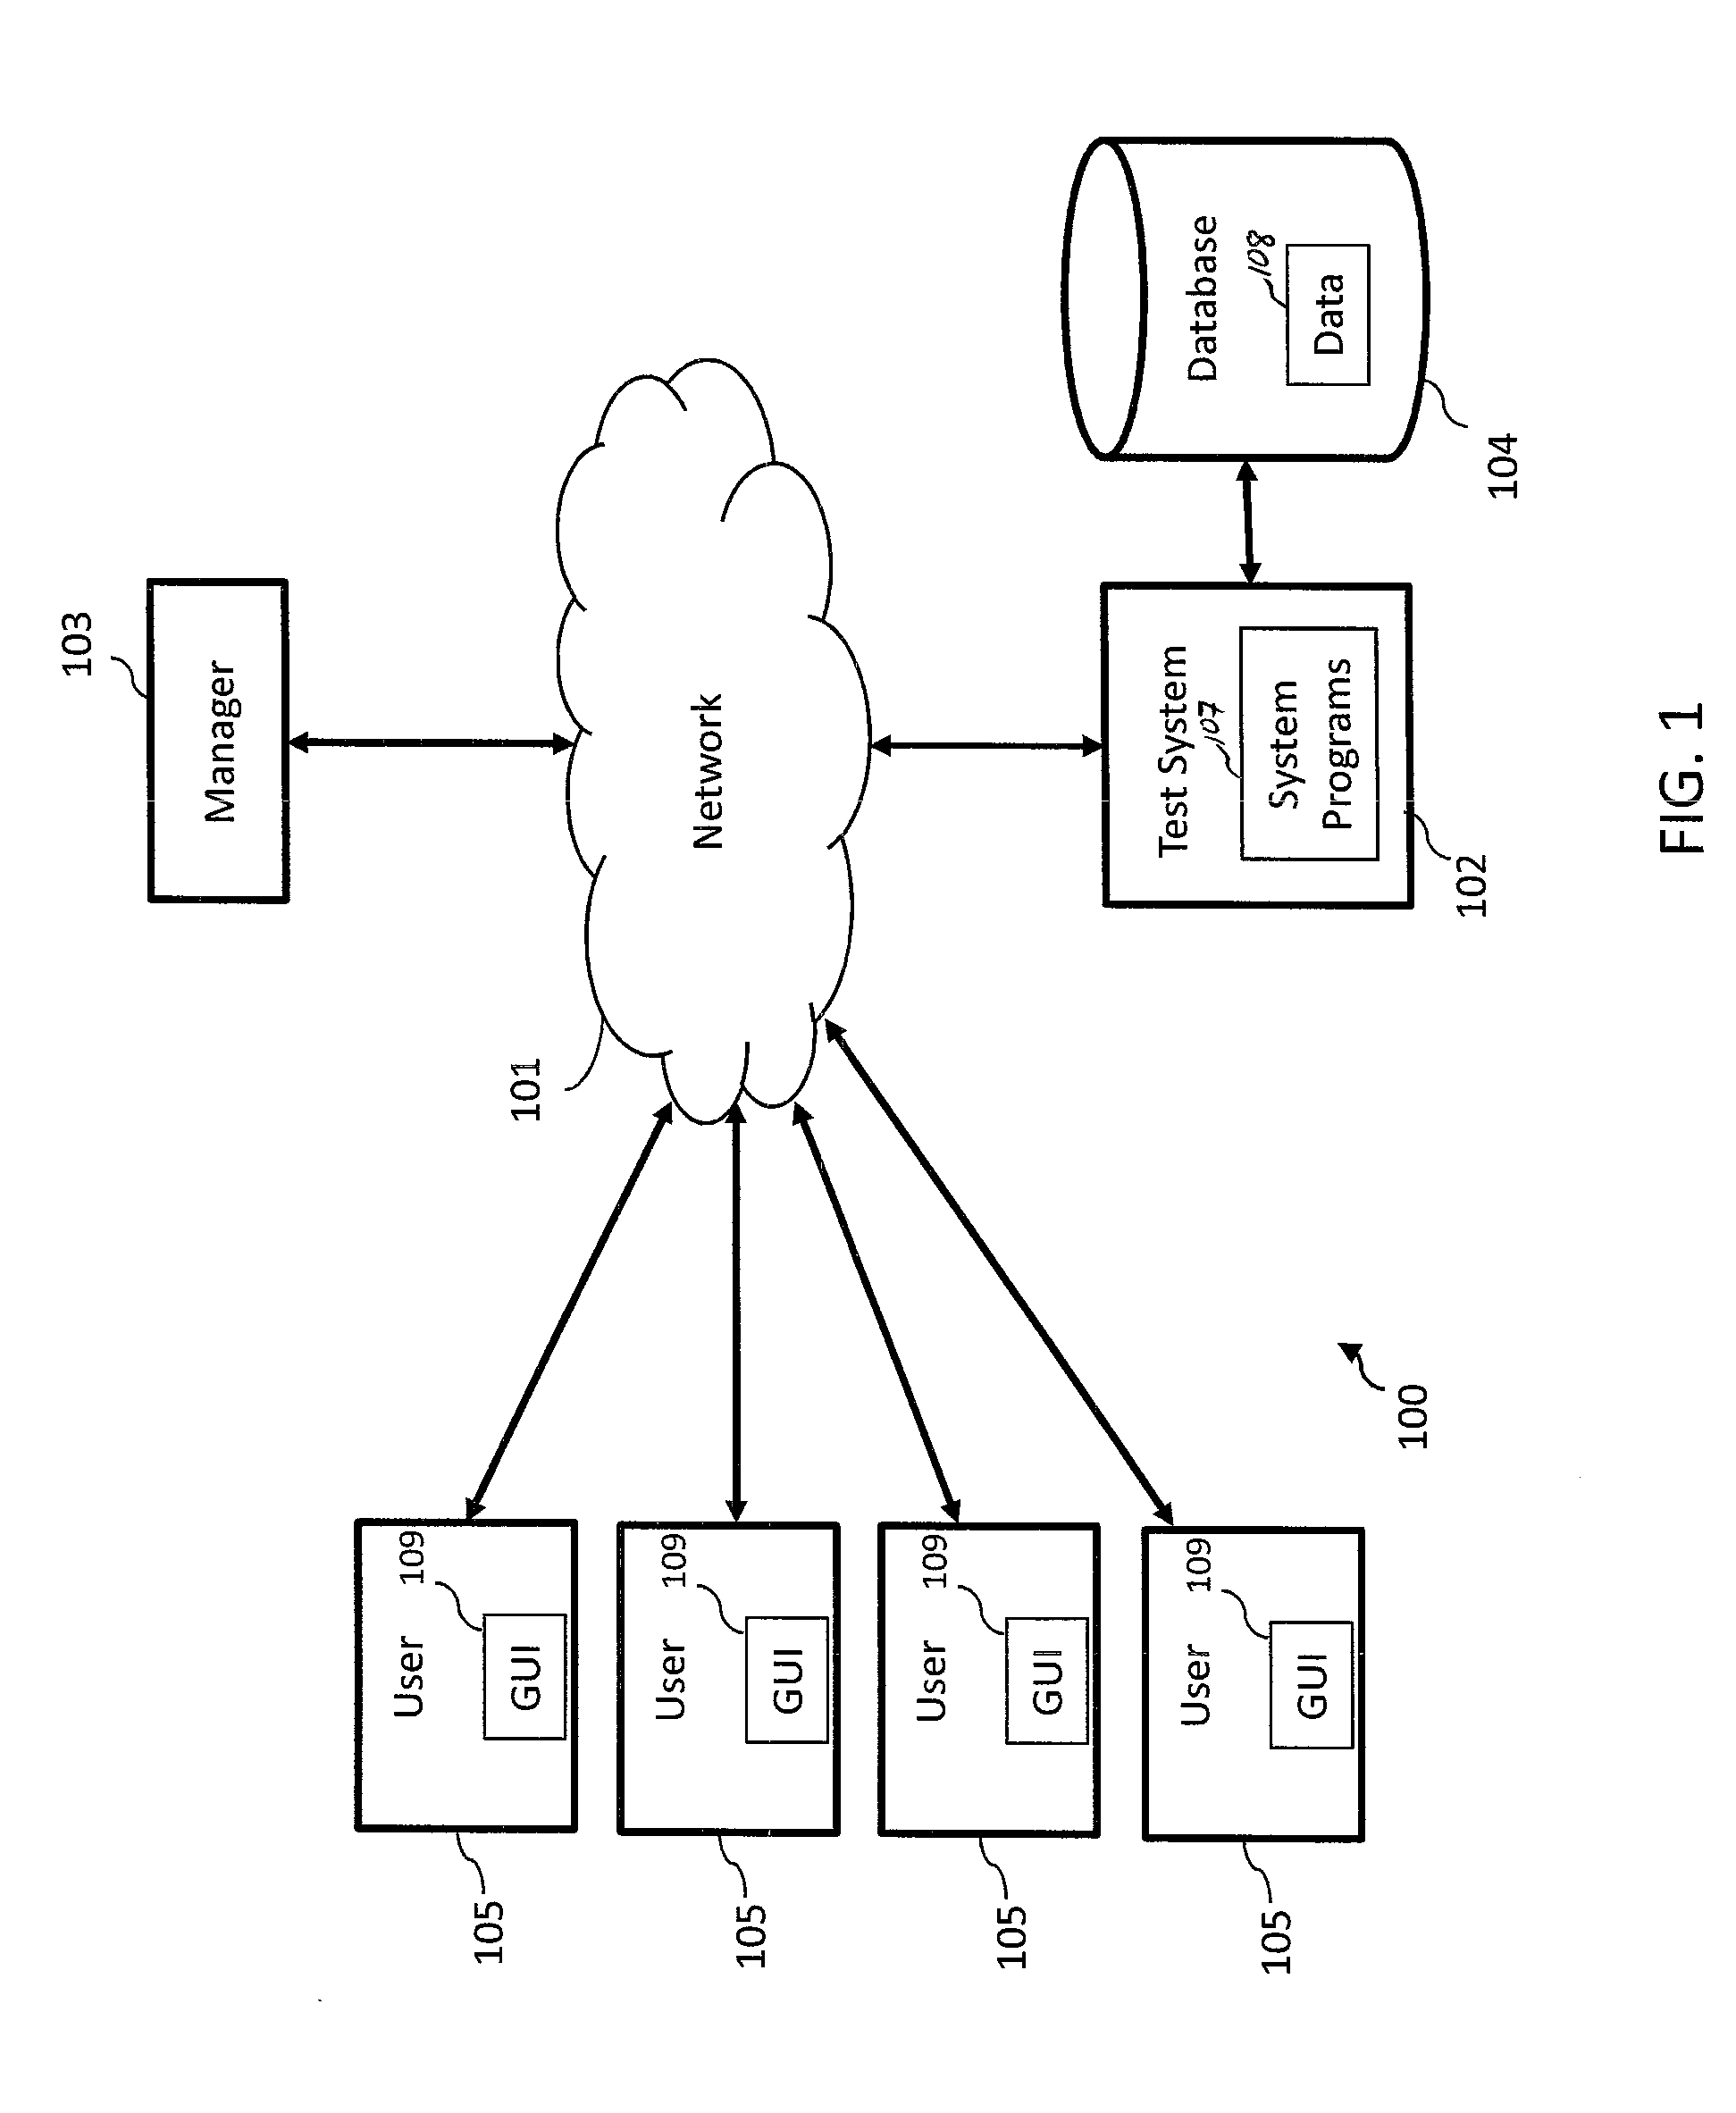 System and method for interactive electronic learning and assessment